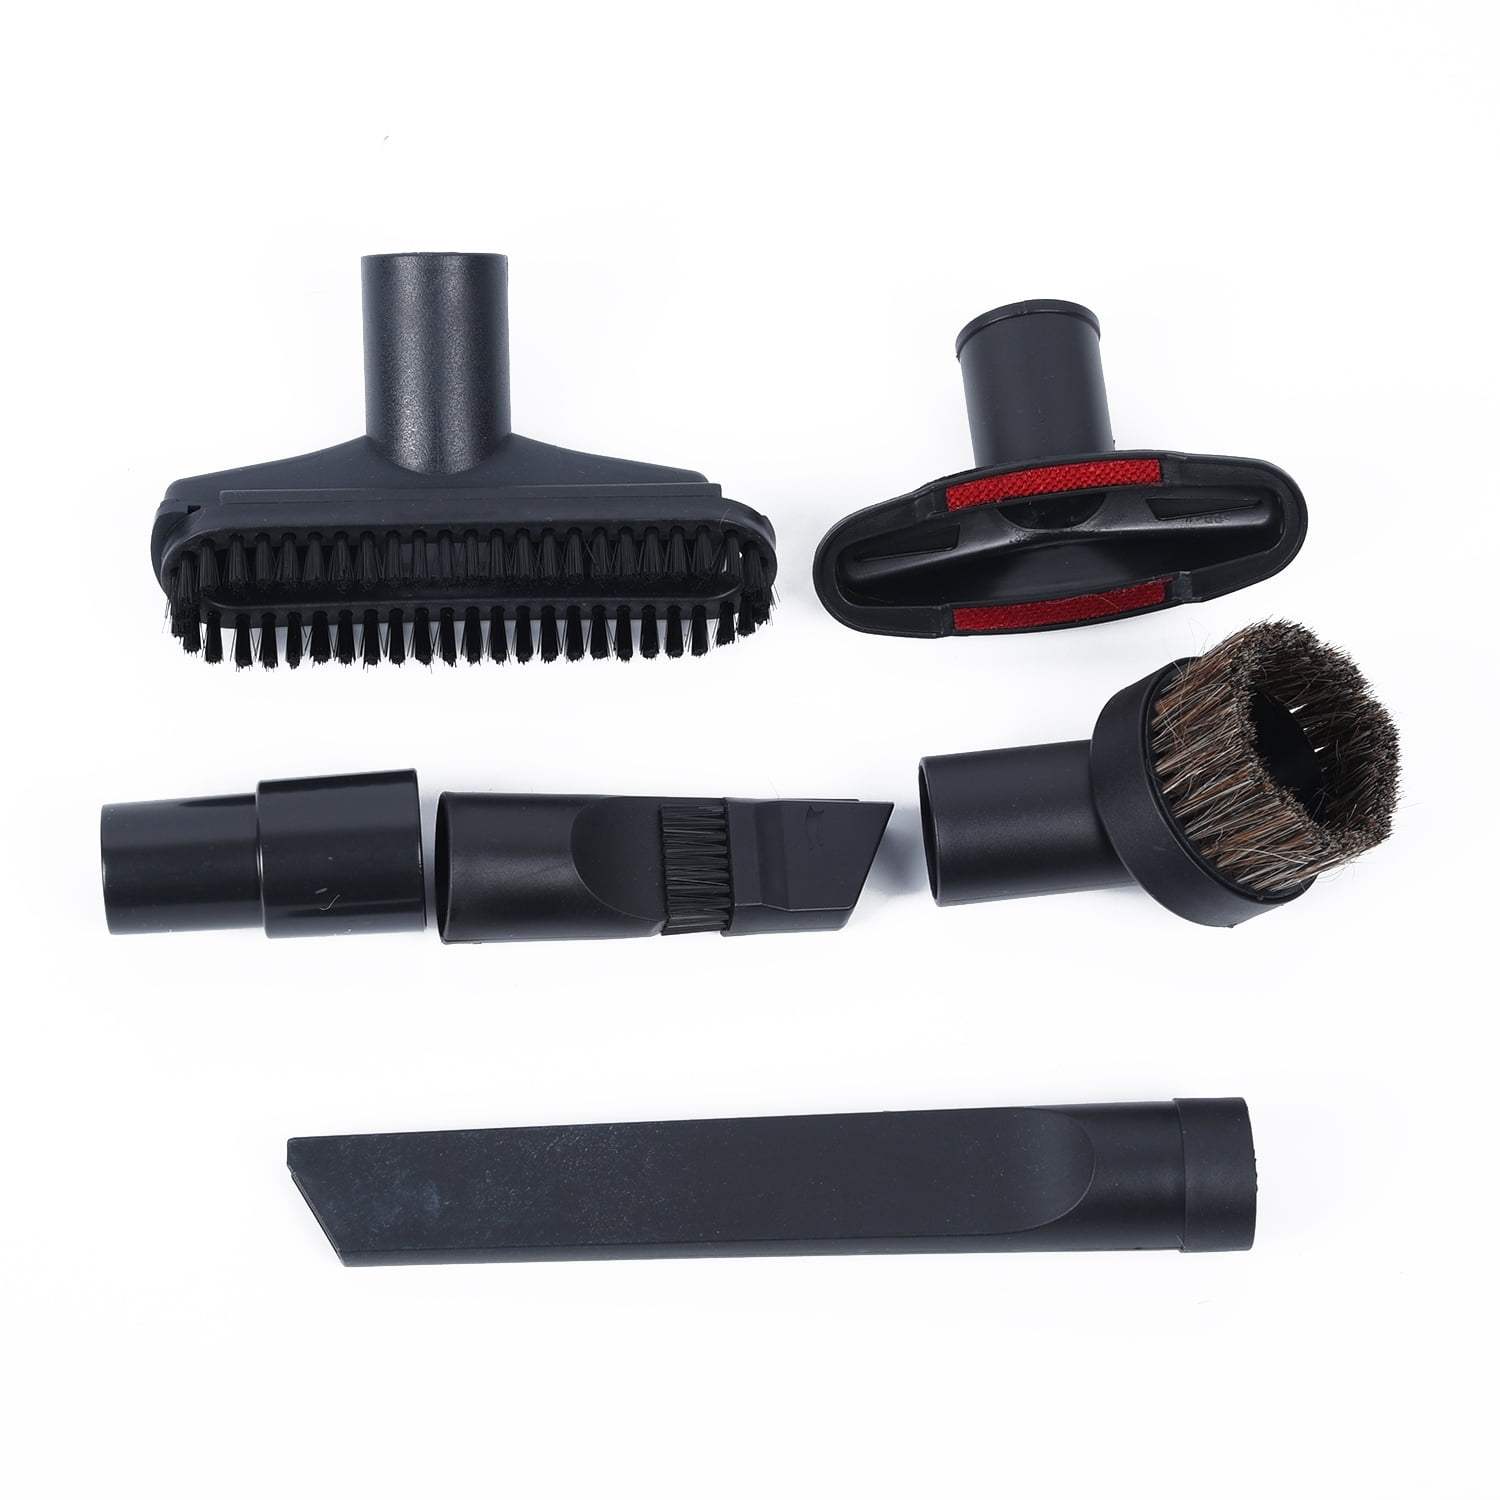 1pcs 32mm Vacuum Cleaner Brush Nozzle Home Dusting Crevice Stair Tool Kit Part 